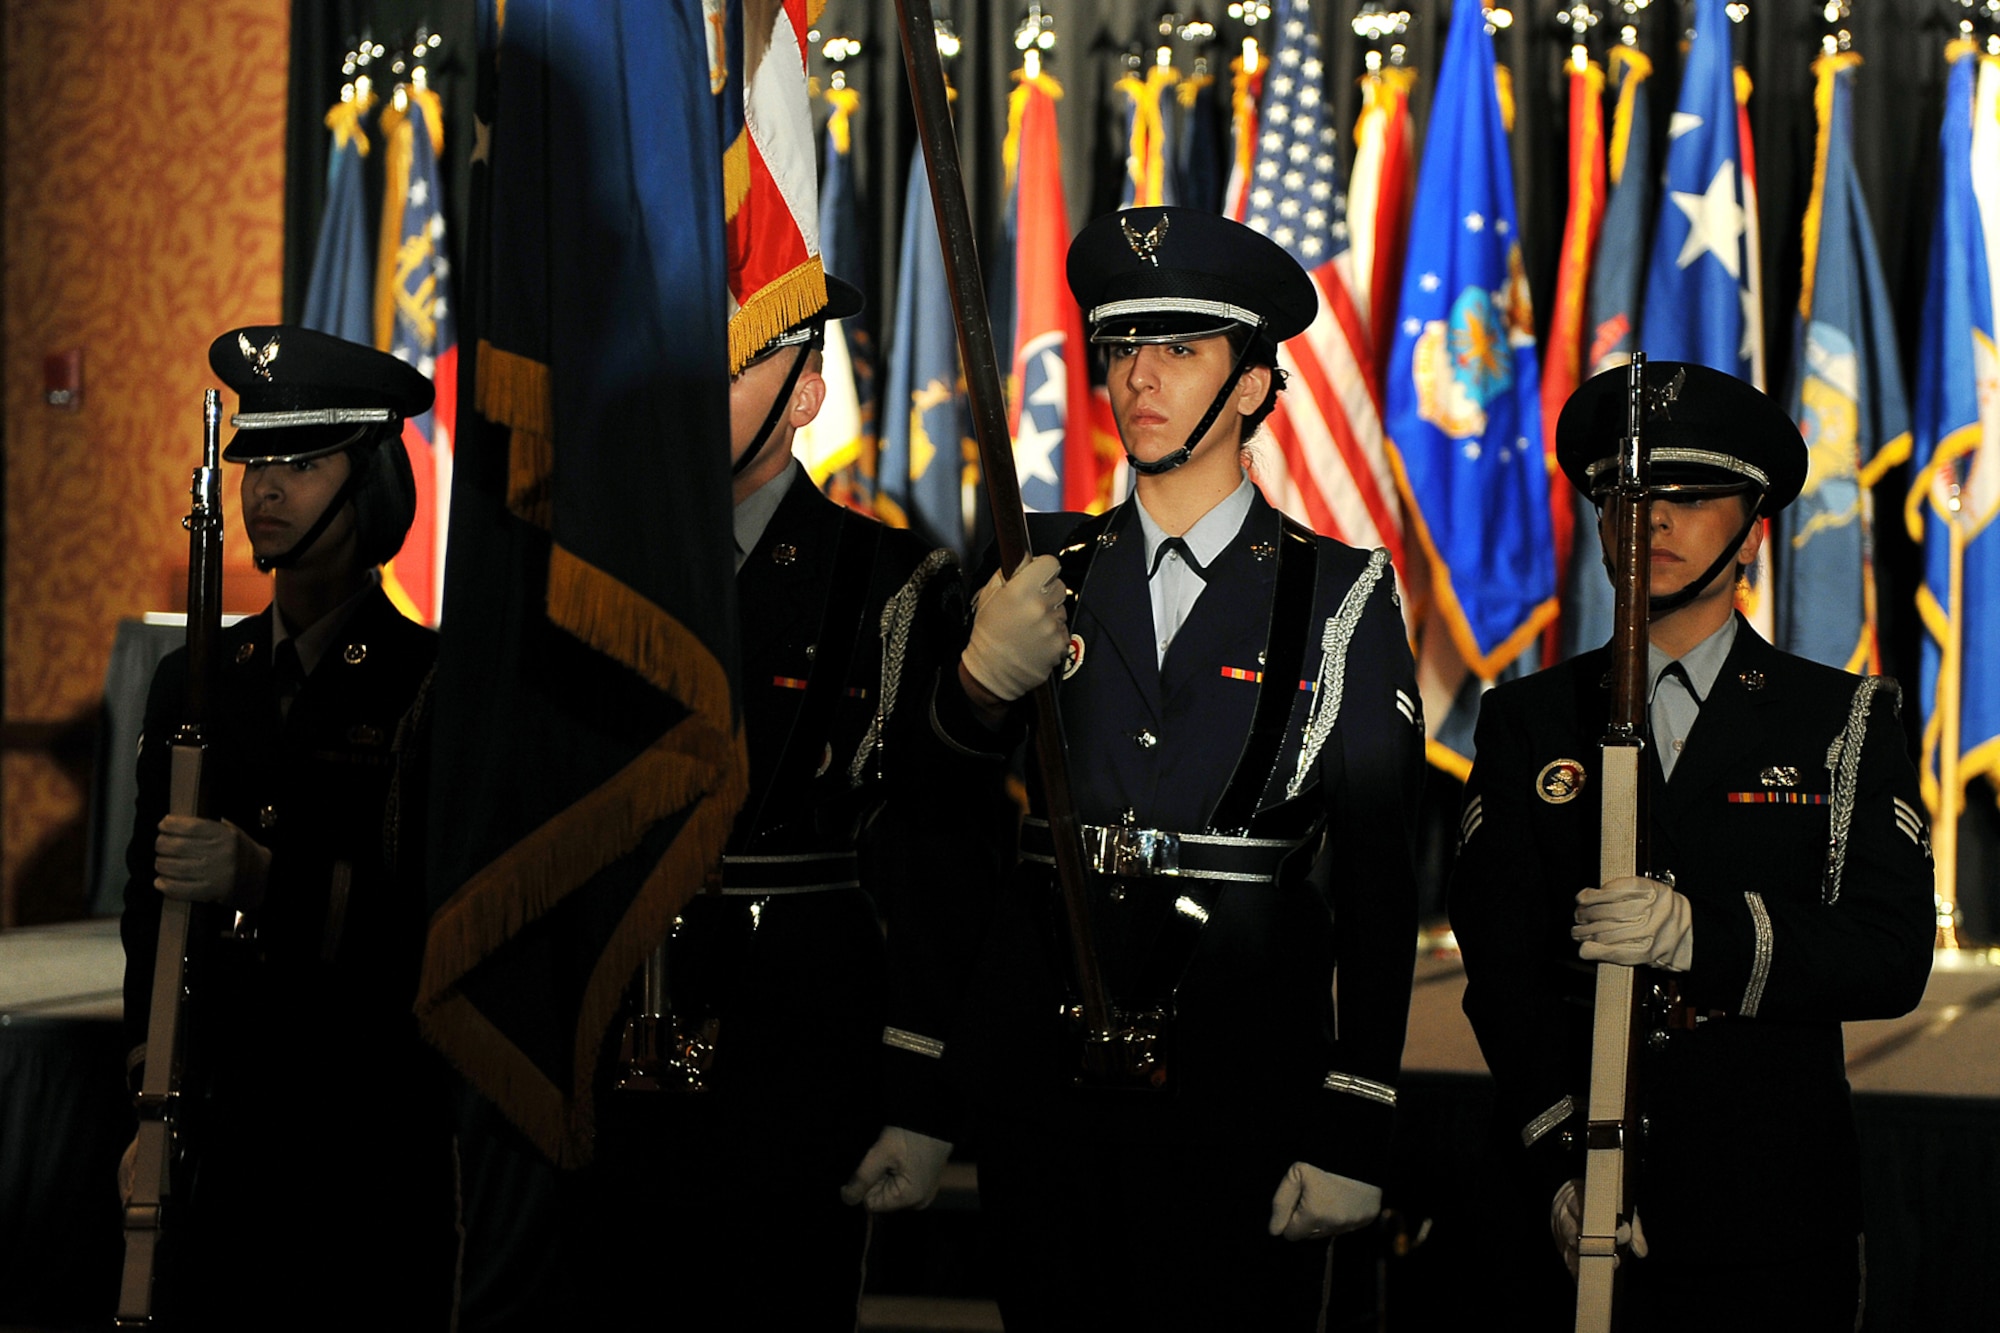 OFFUTT AIR FORCE BASE, Neb. -- Honor Guard members from various bases across Air Combat Command post the colors during ACC's Outstanding Airmen of the Year banquet at the Embassy Suites hotel in La Vista, Neb., April 21. More than 200 people attended the ceremony to honor the command's best Airmen for their dedication, sacrifice and service. U.S. Air Force photo by Charles Haymond